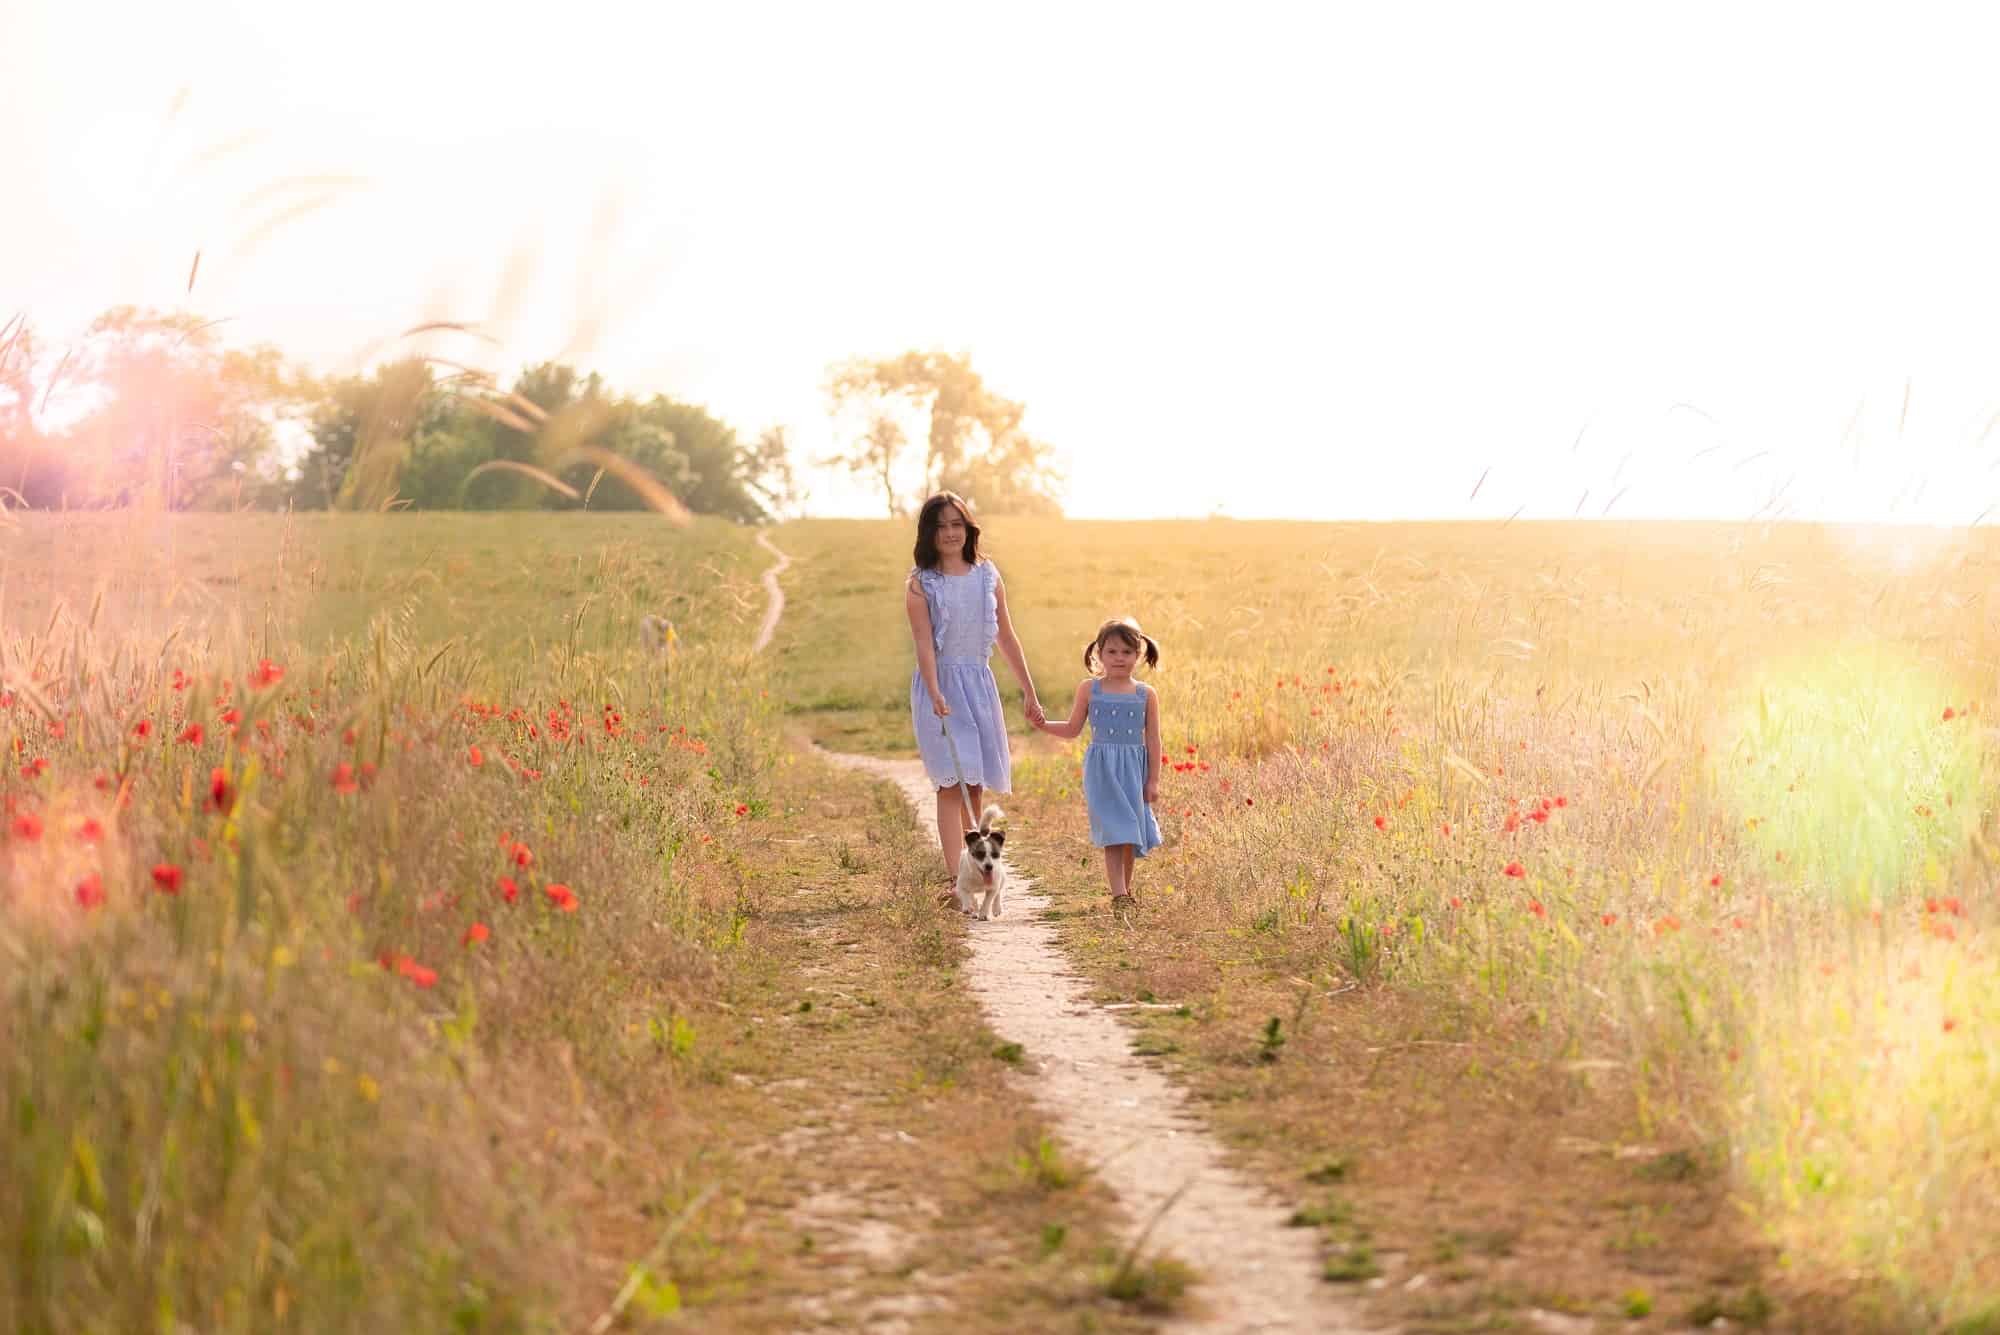 Children walking down a path in the field of poppies with their dog, for a natural children's photo shoot